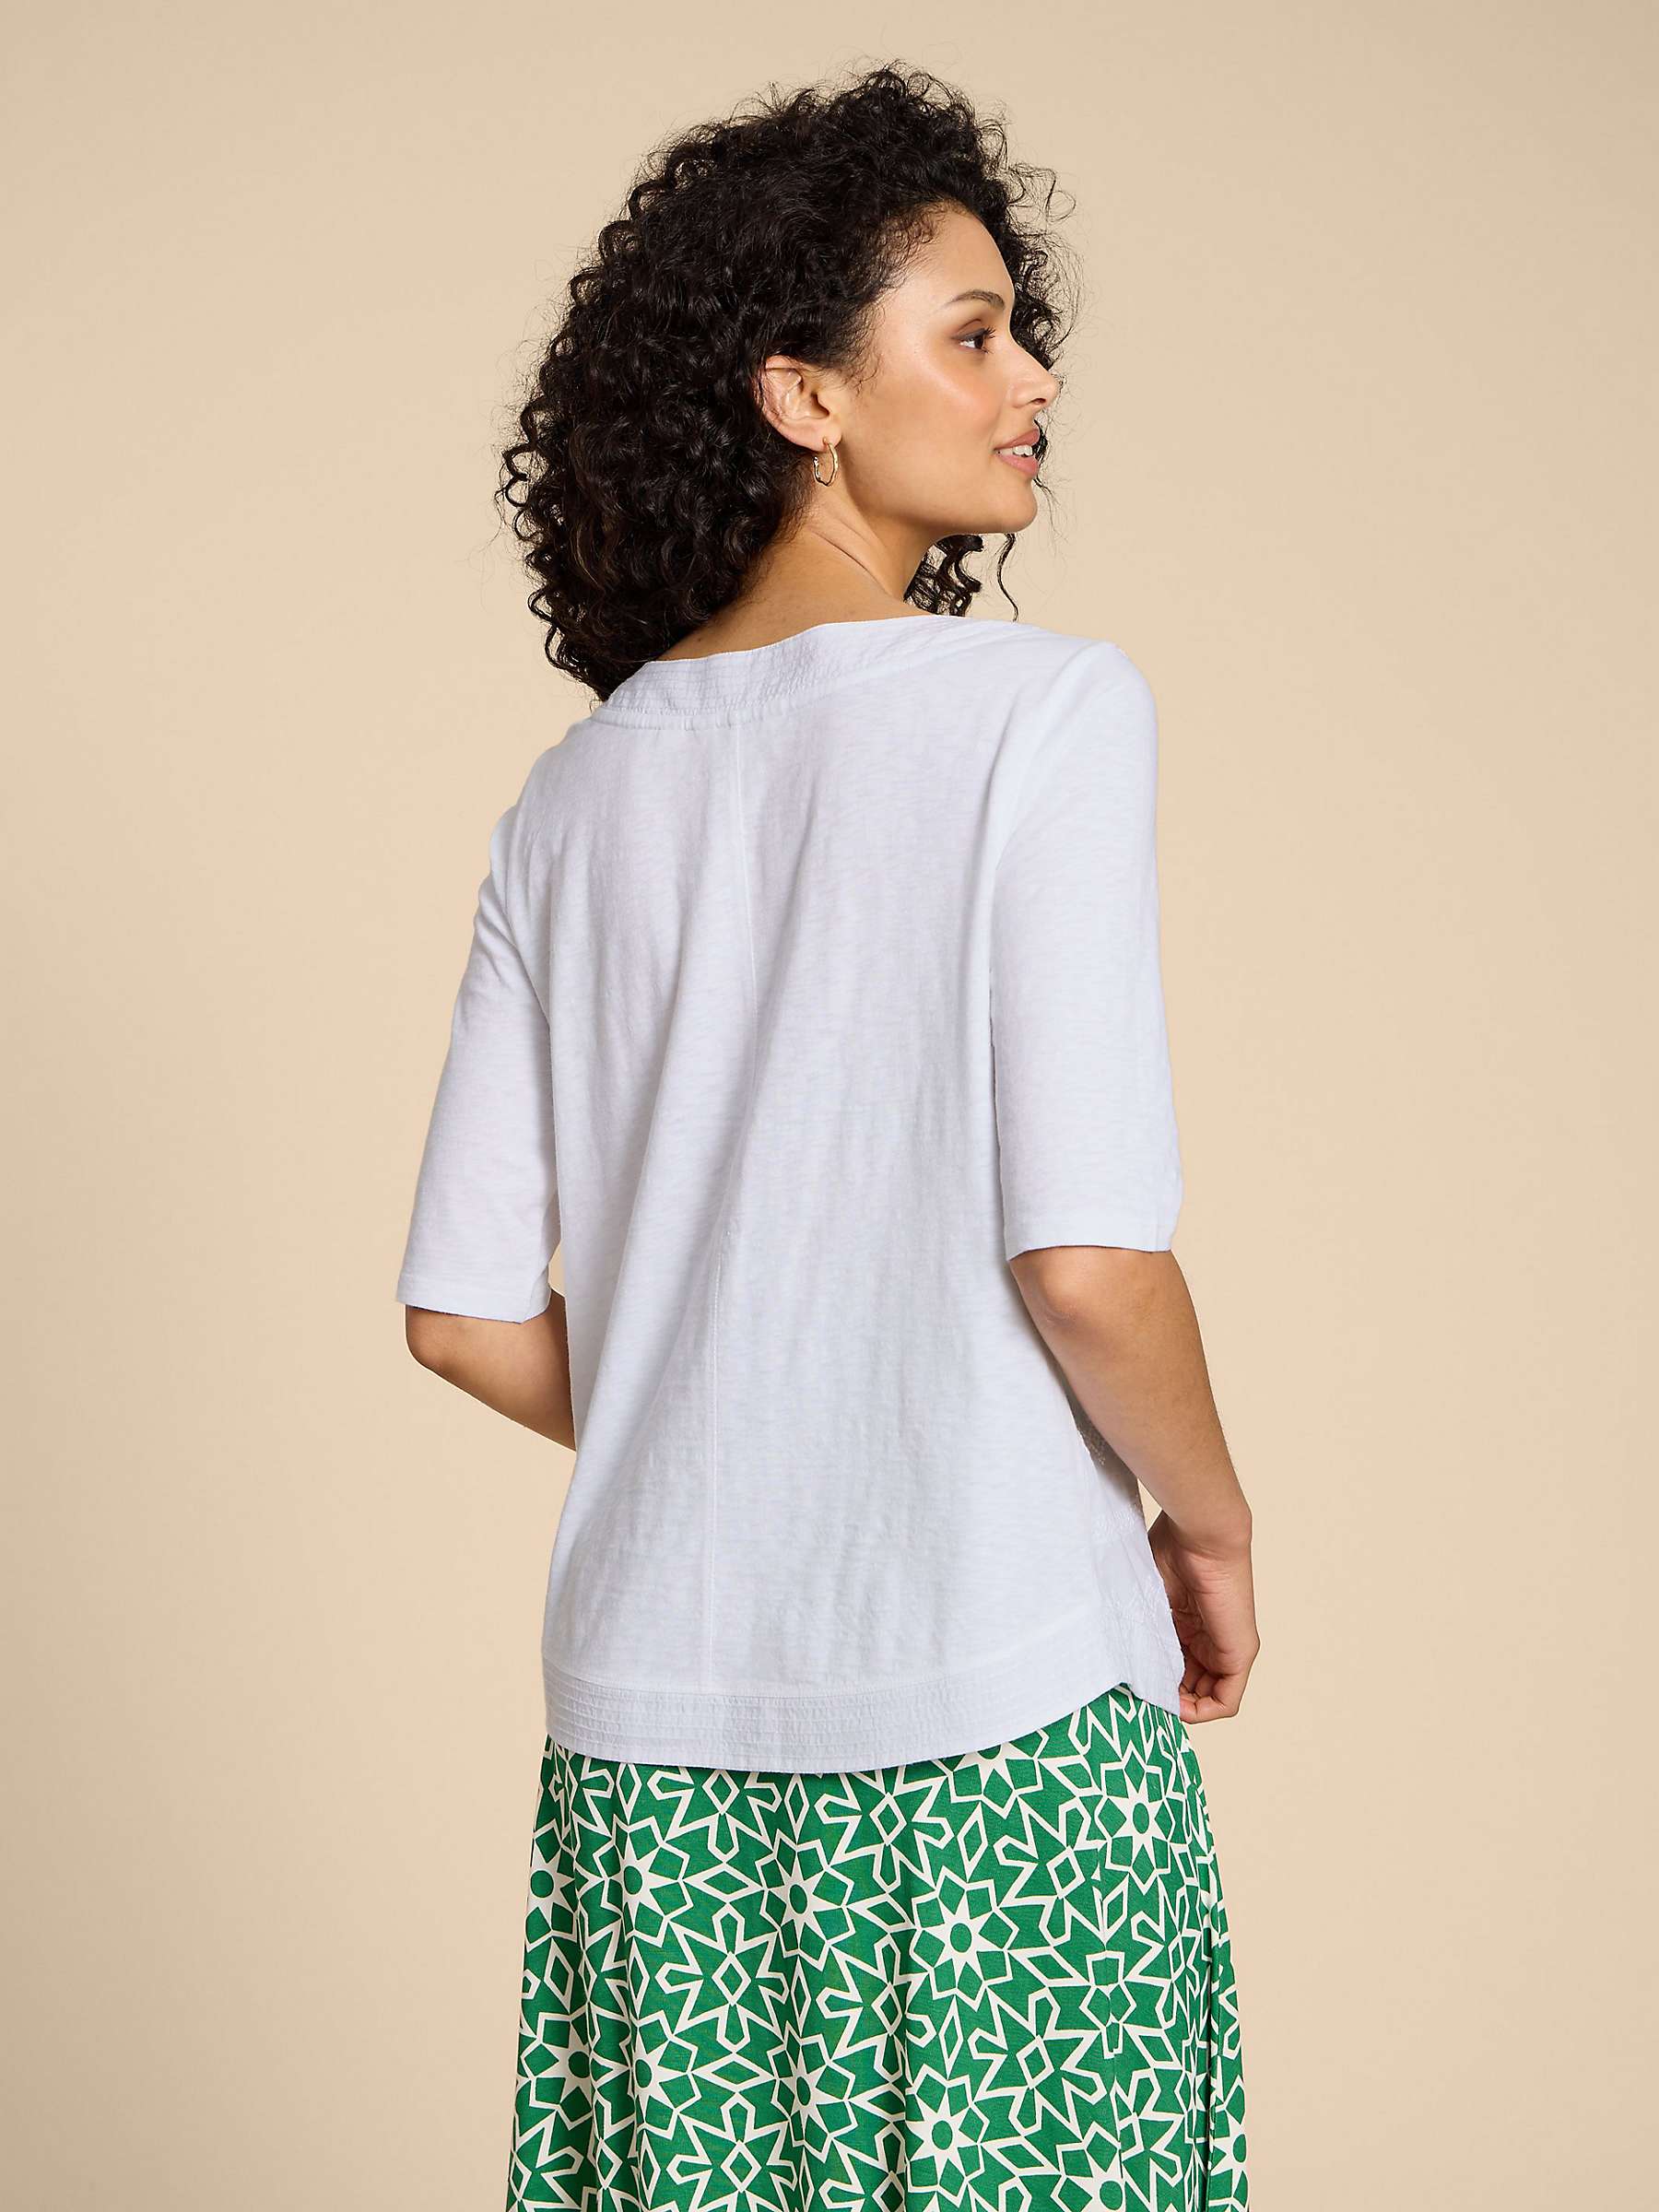 Buy White Stuff Weaver Embroidered Top, White Online at johnlewis.com